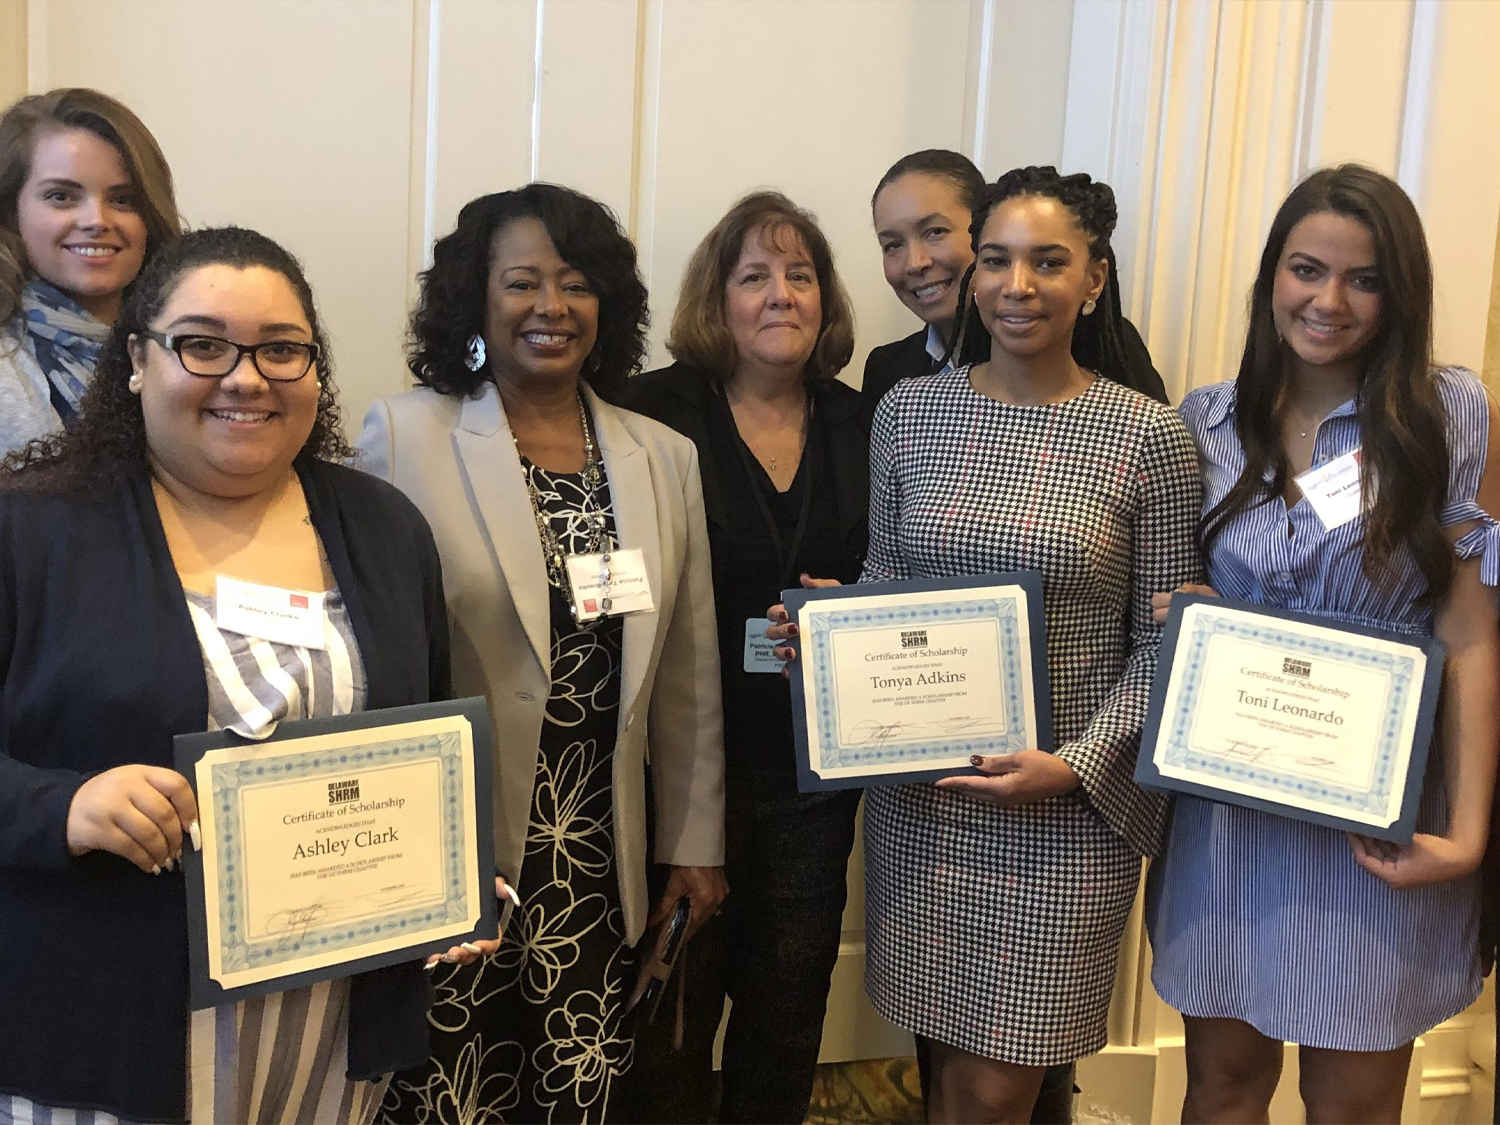 Society for Human Resource Management students display certificates of recognition